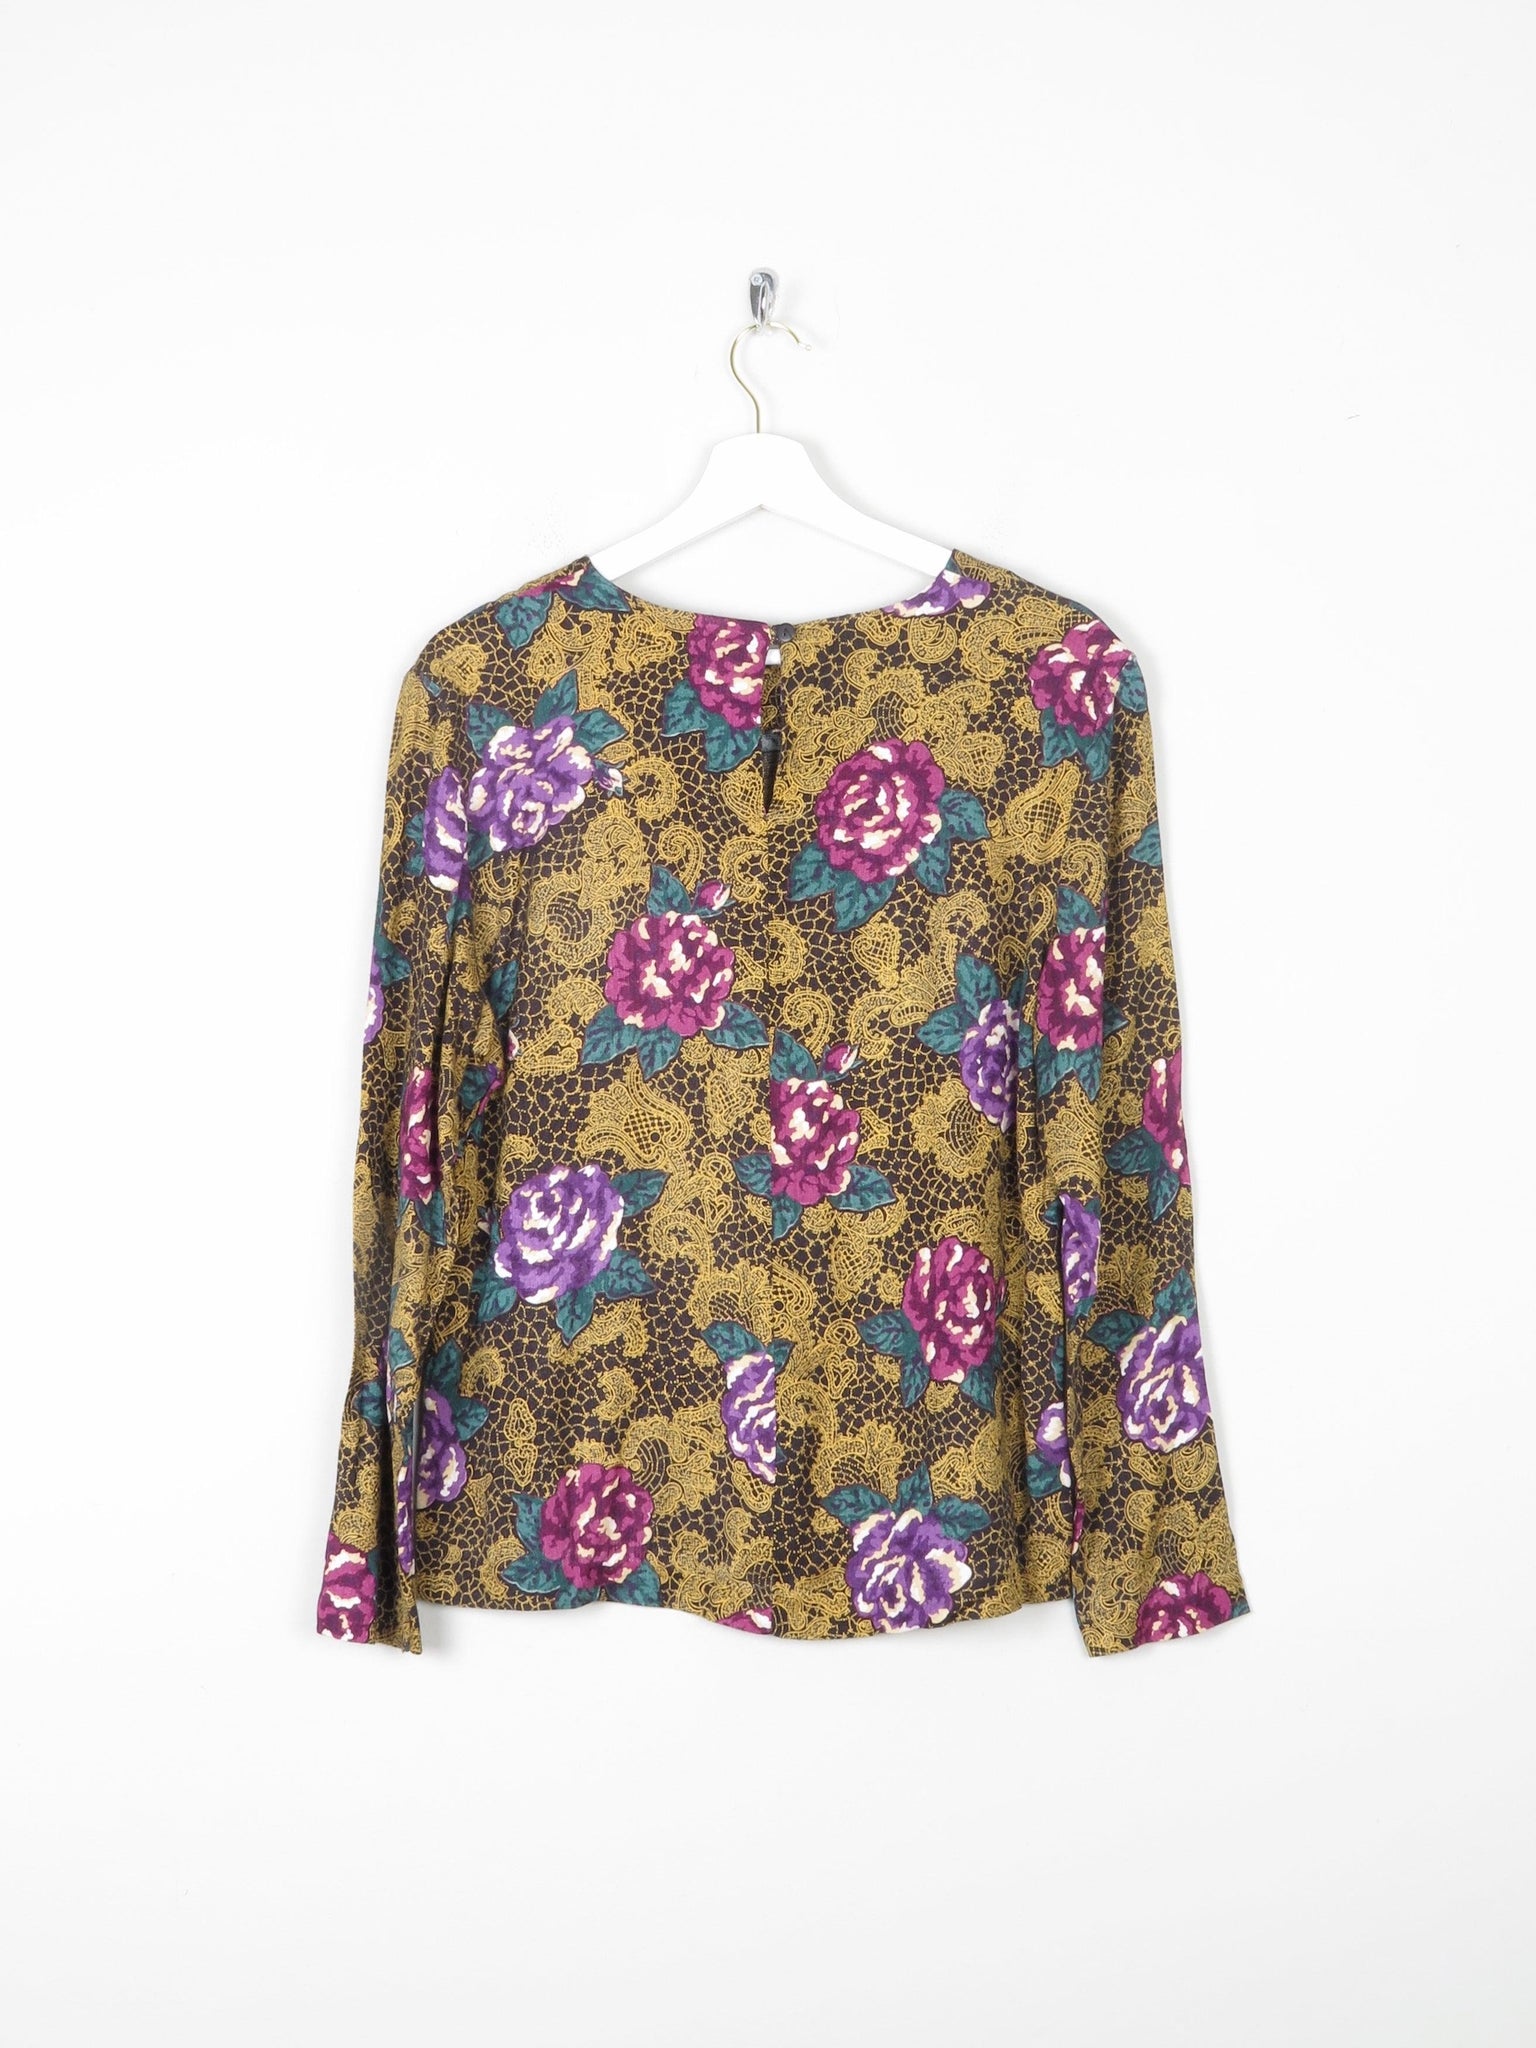 Women's Green & Pink Floral Printed Blouse M - The Harlequin